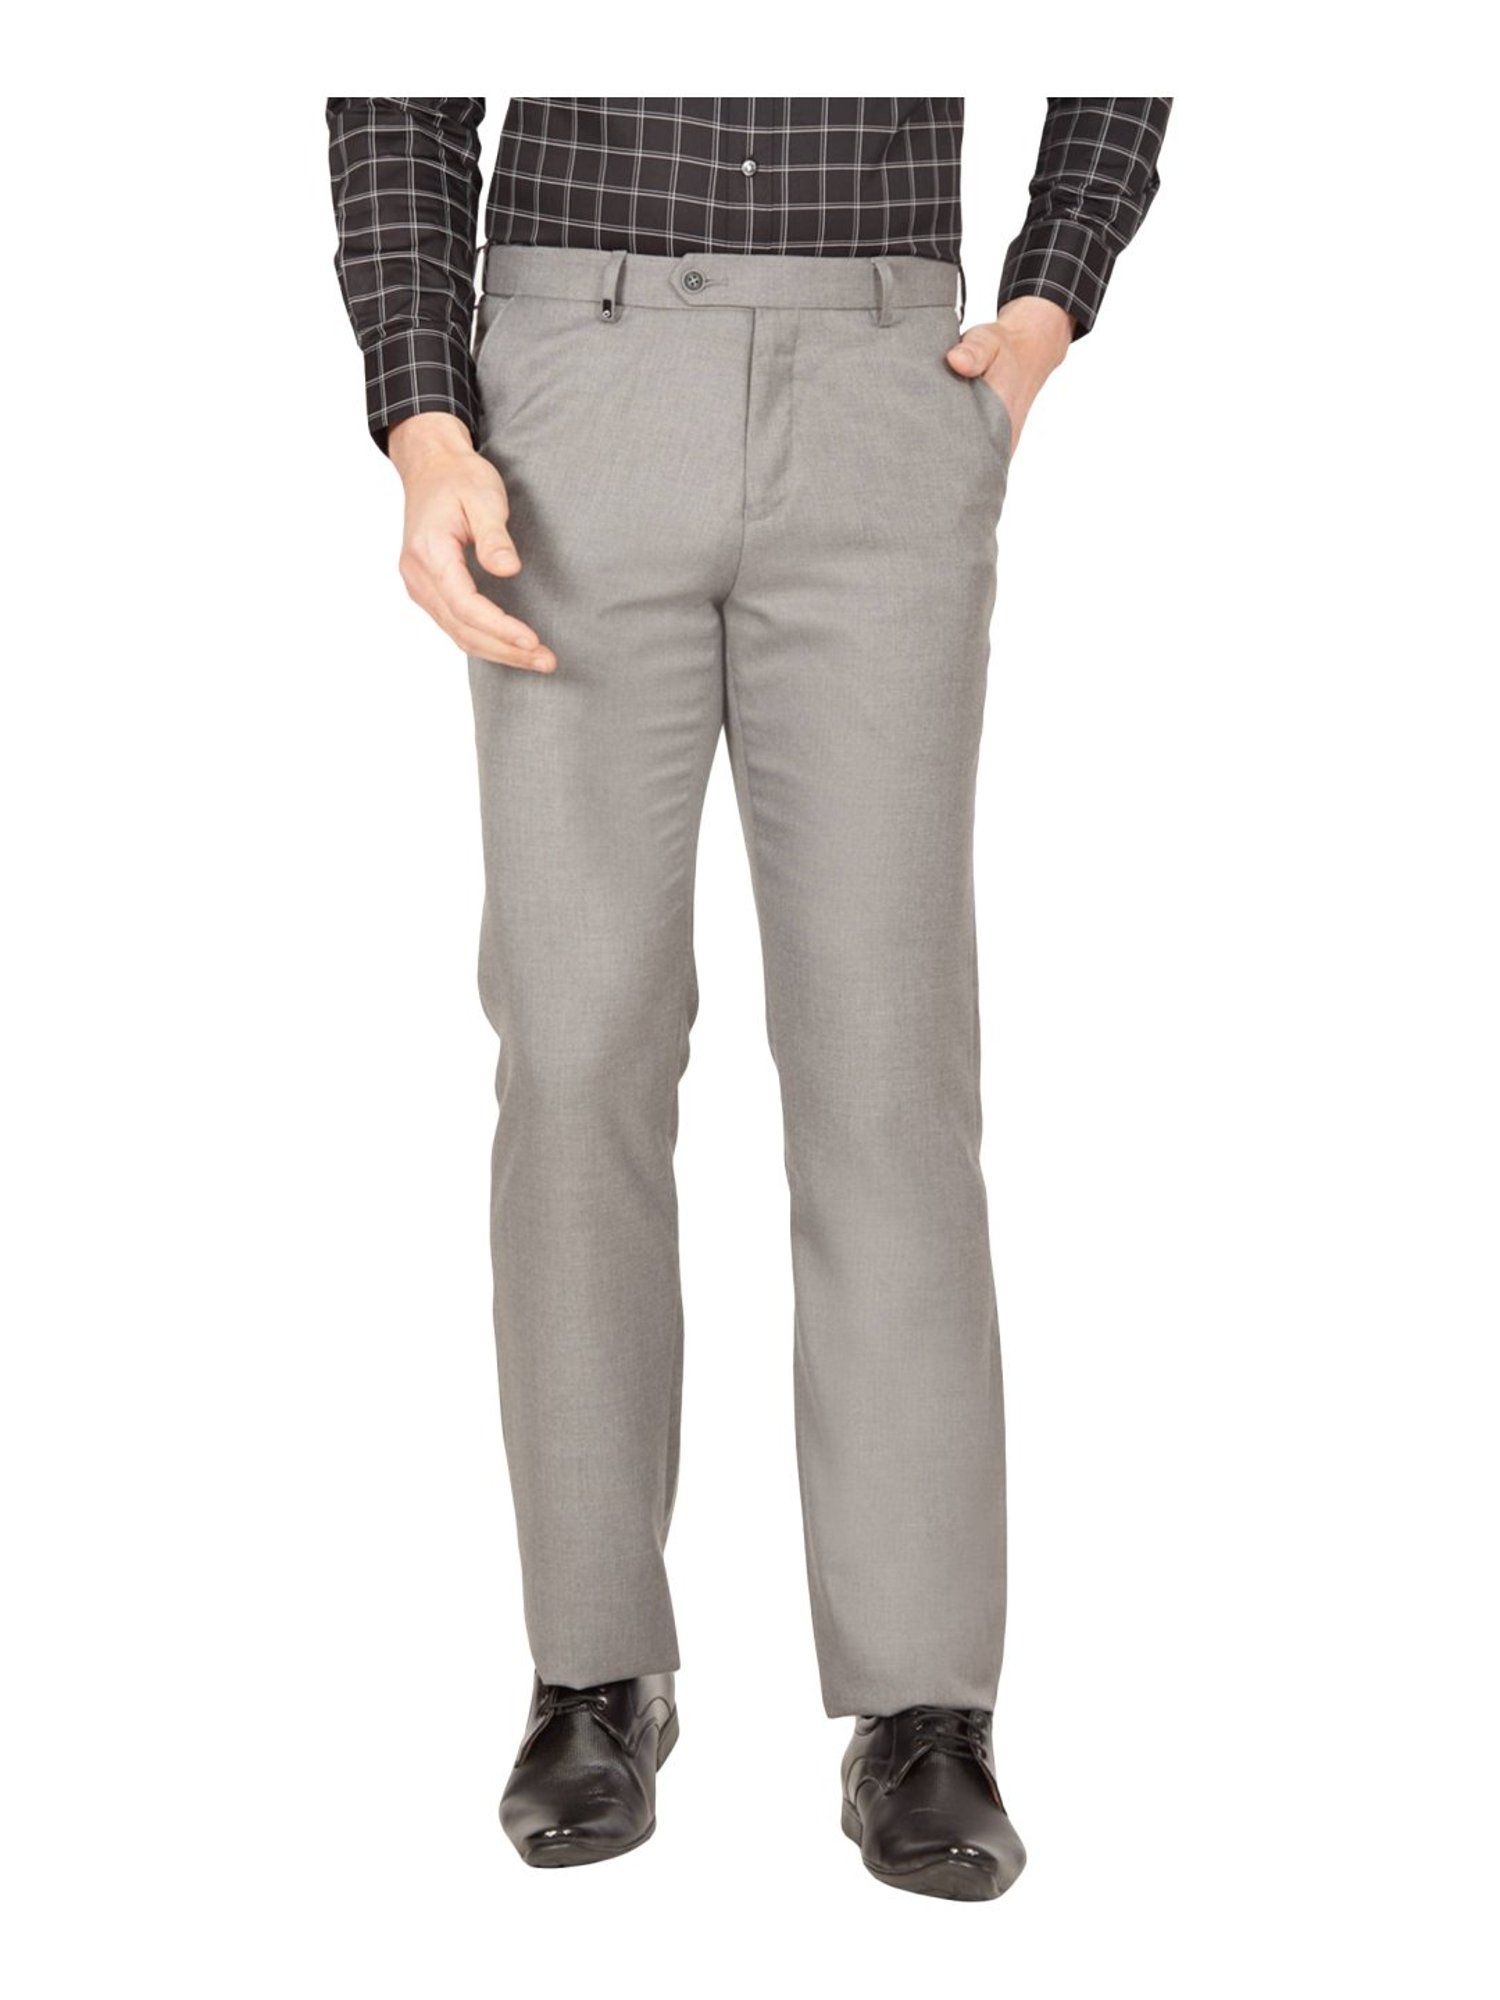 Buy Oxemberg Grey Slim Fit Self Pattern Chinos for Mens Online @ Tata CLiQ